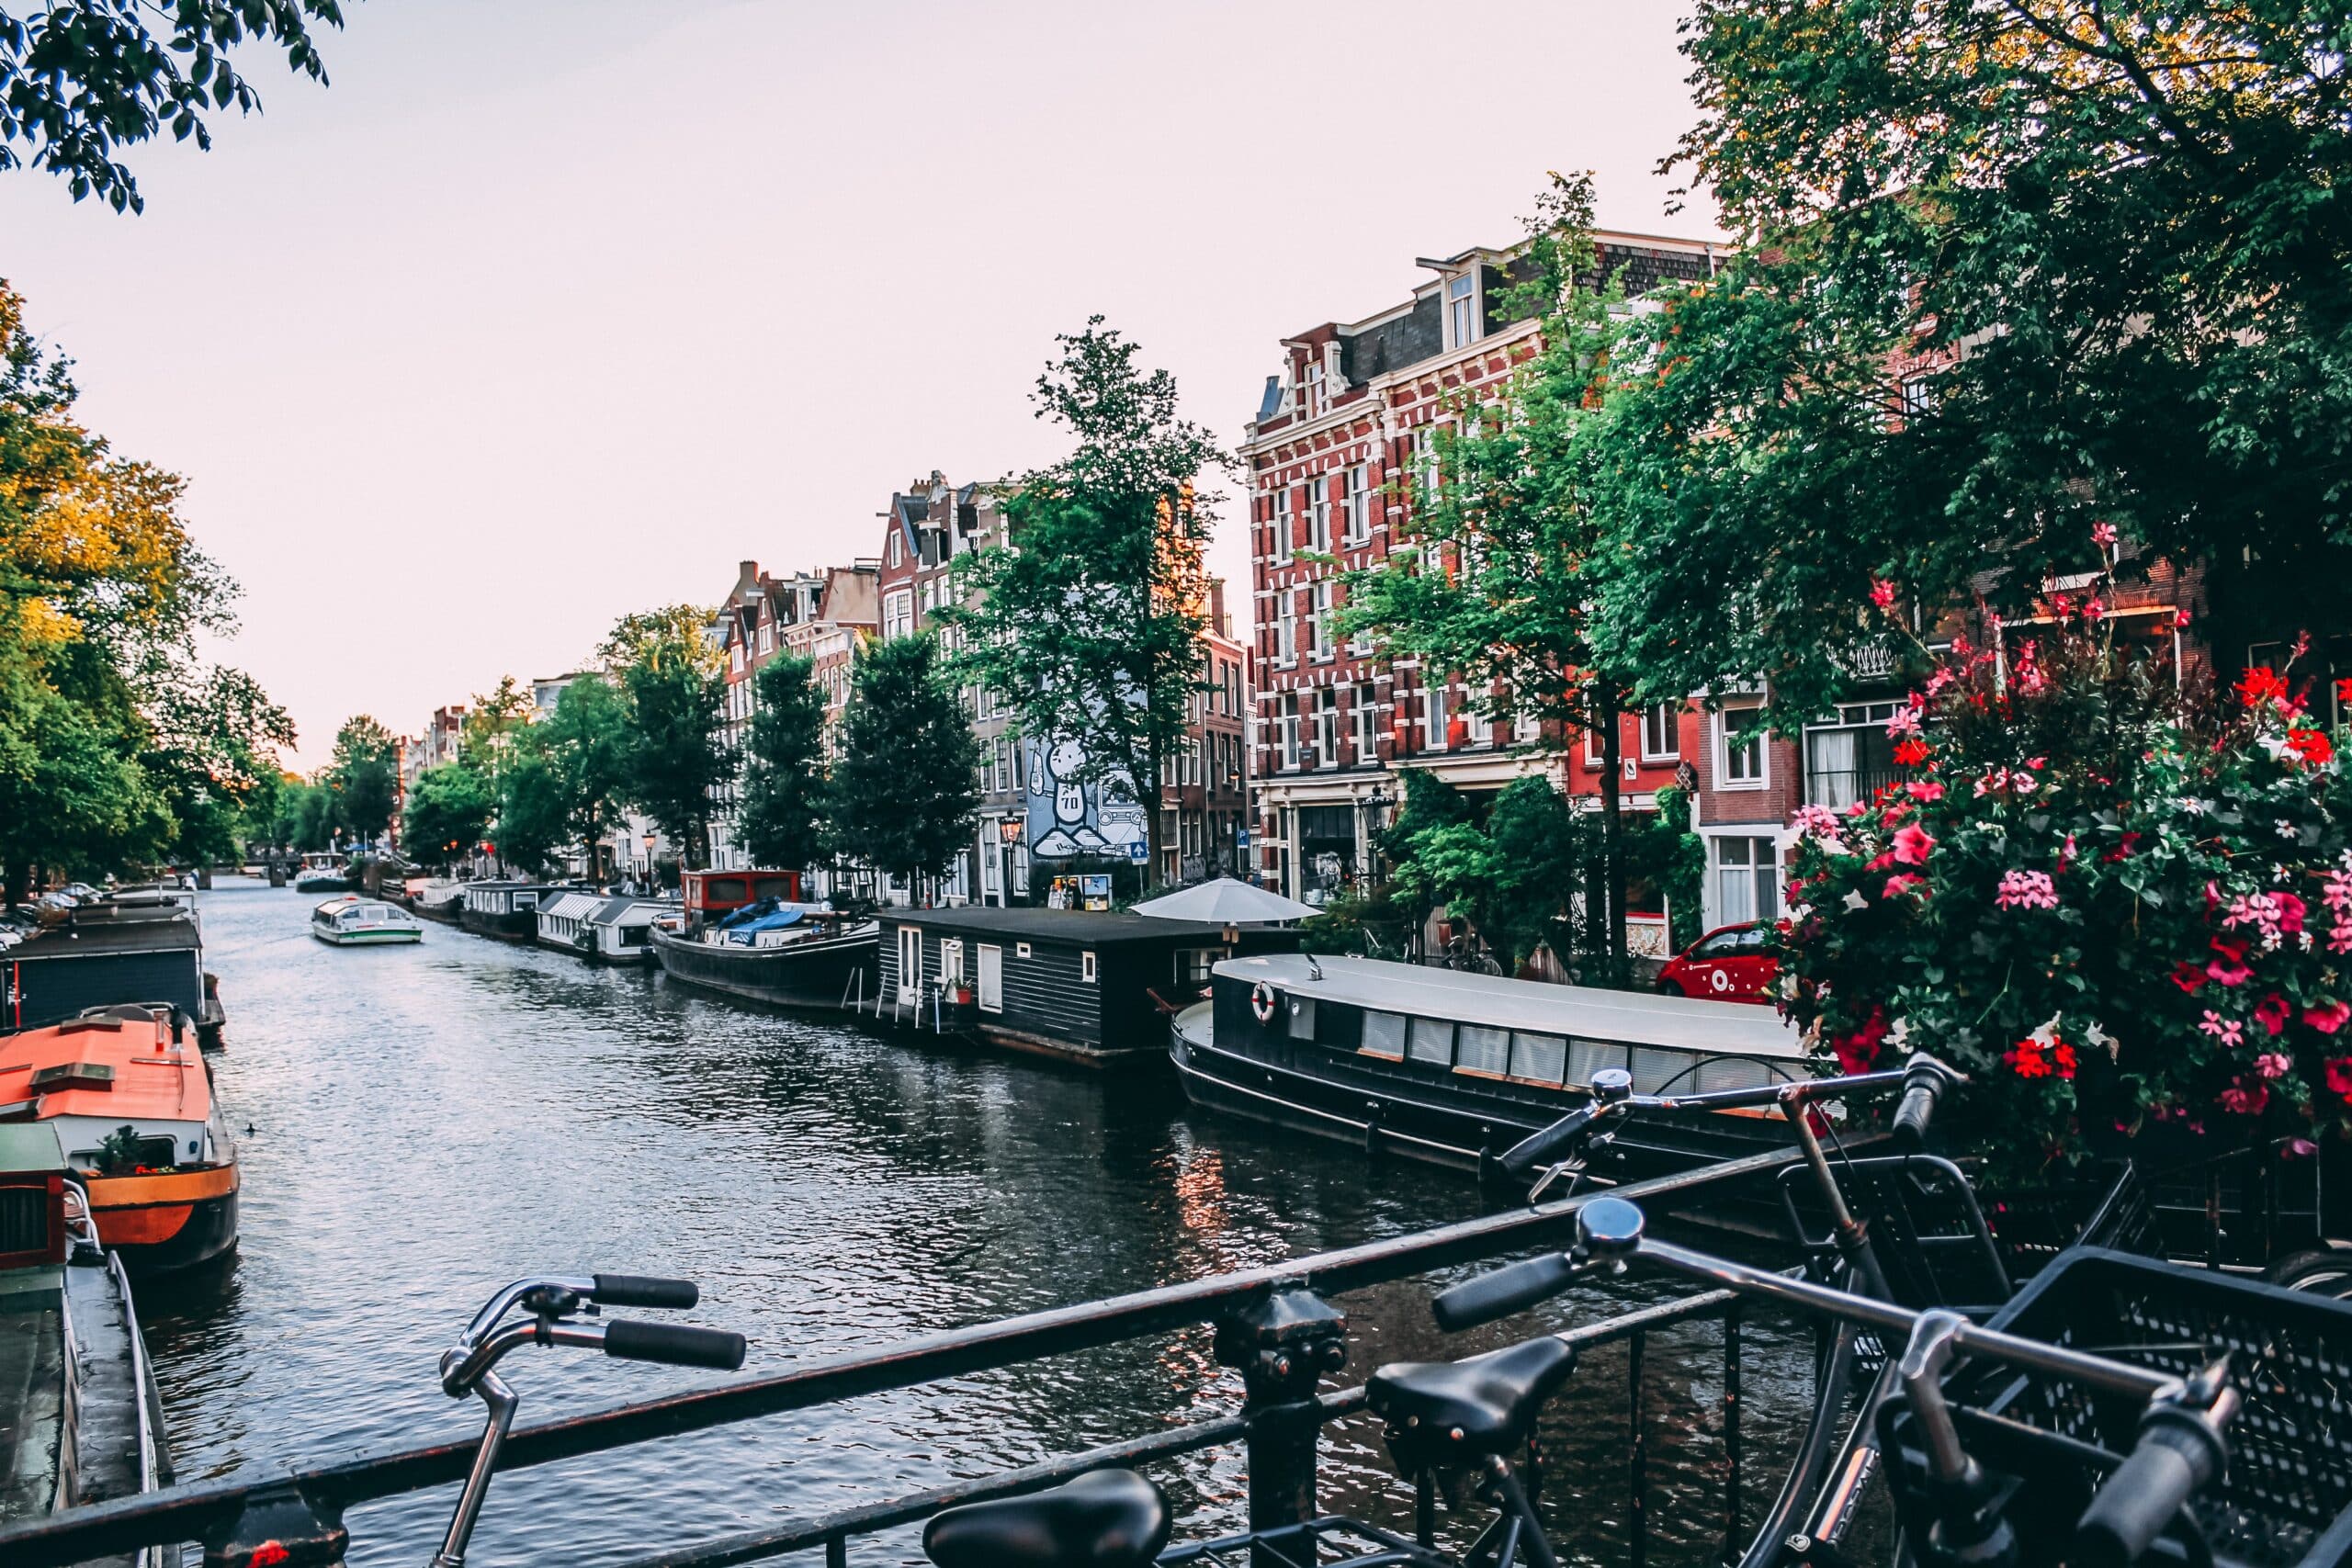 Our Producer’s top filming locations in Amsterdam